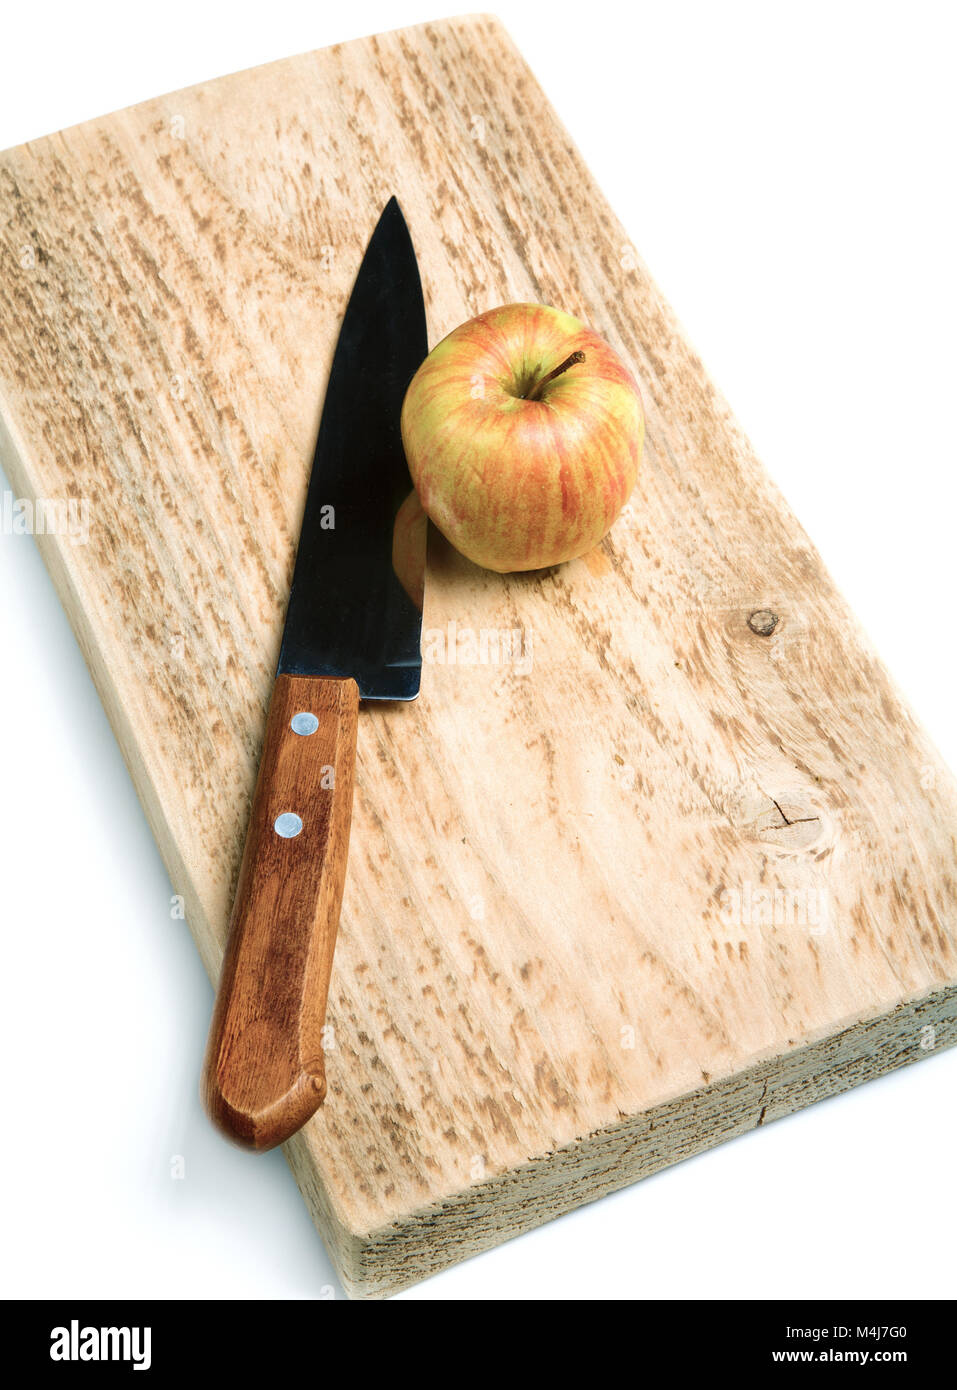 Knife and an apple on a cutting board isolated Stock Photo